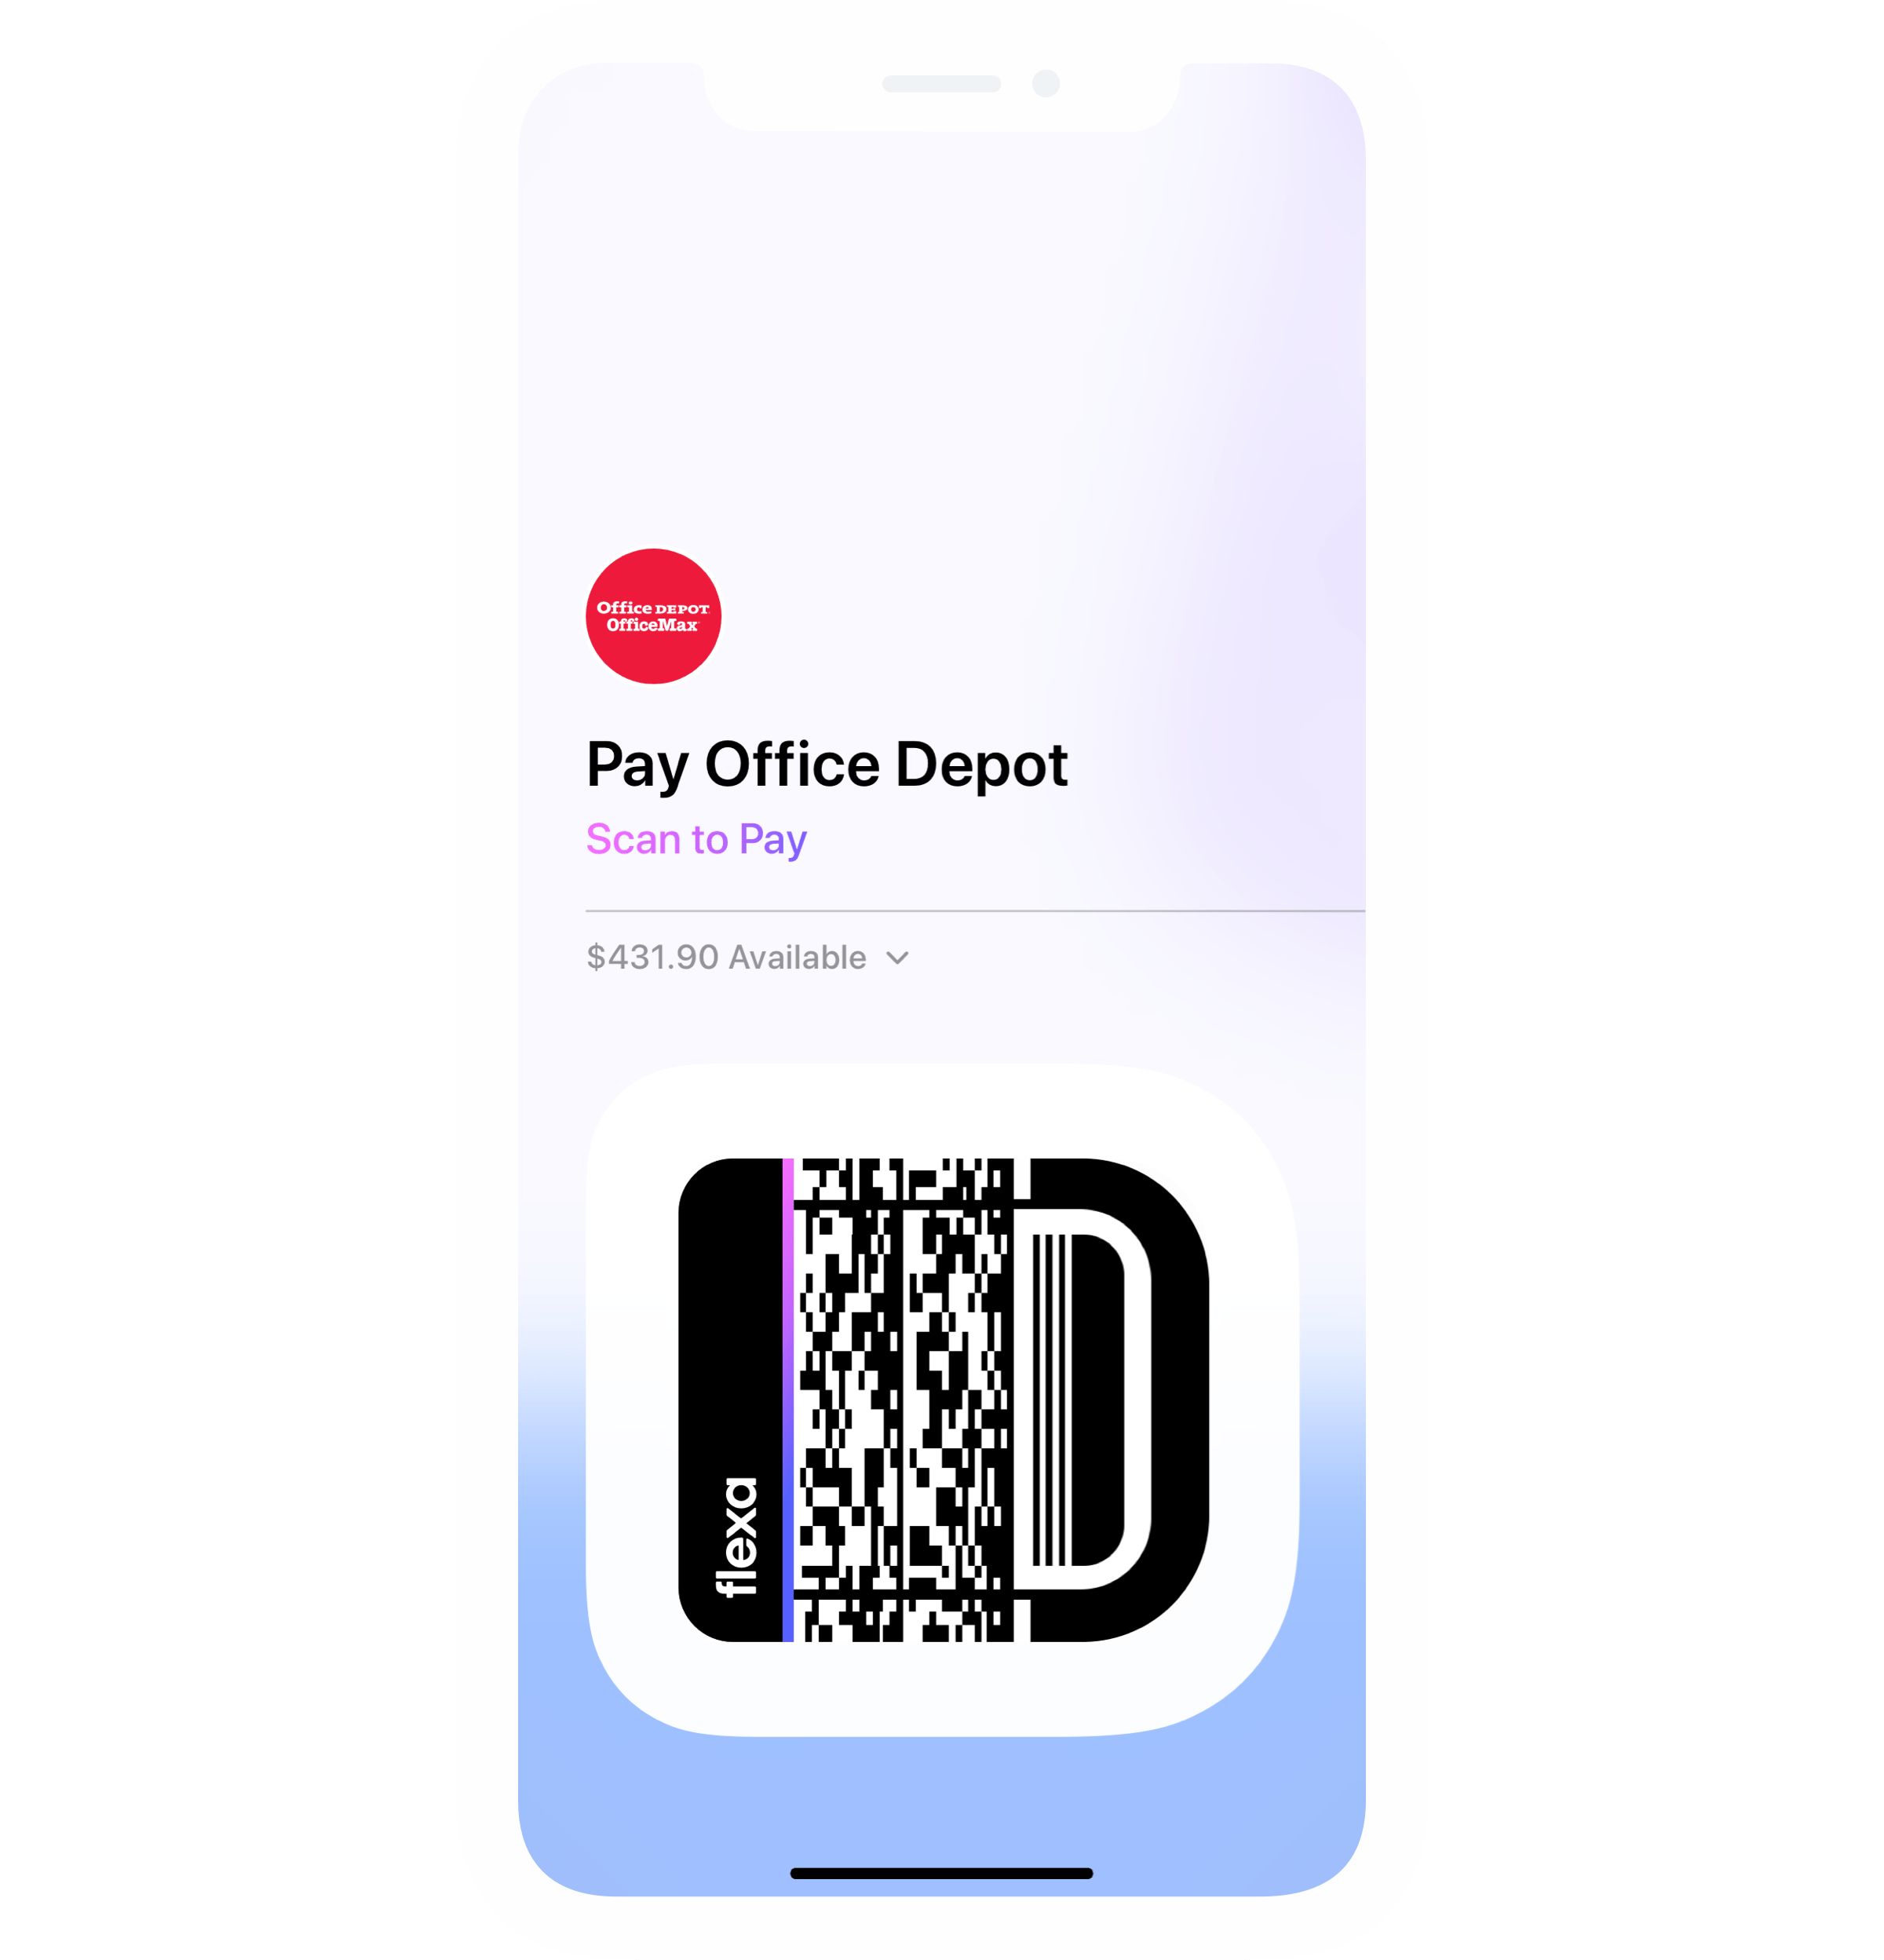 Flexa's Mobile App payment with Office Depot shown on a mobile phone